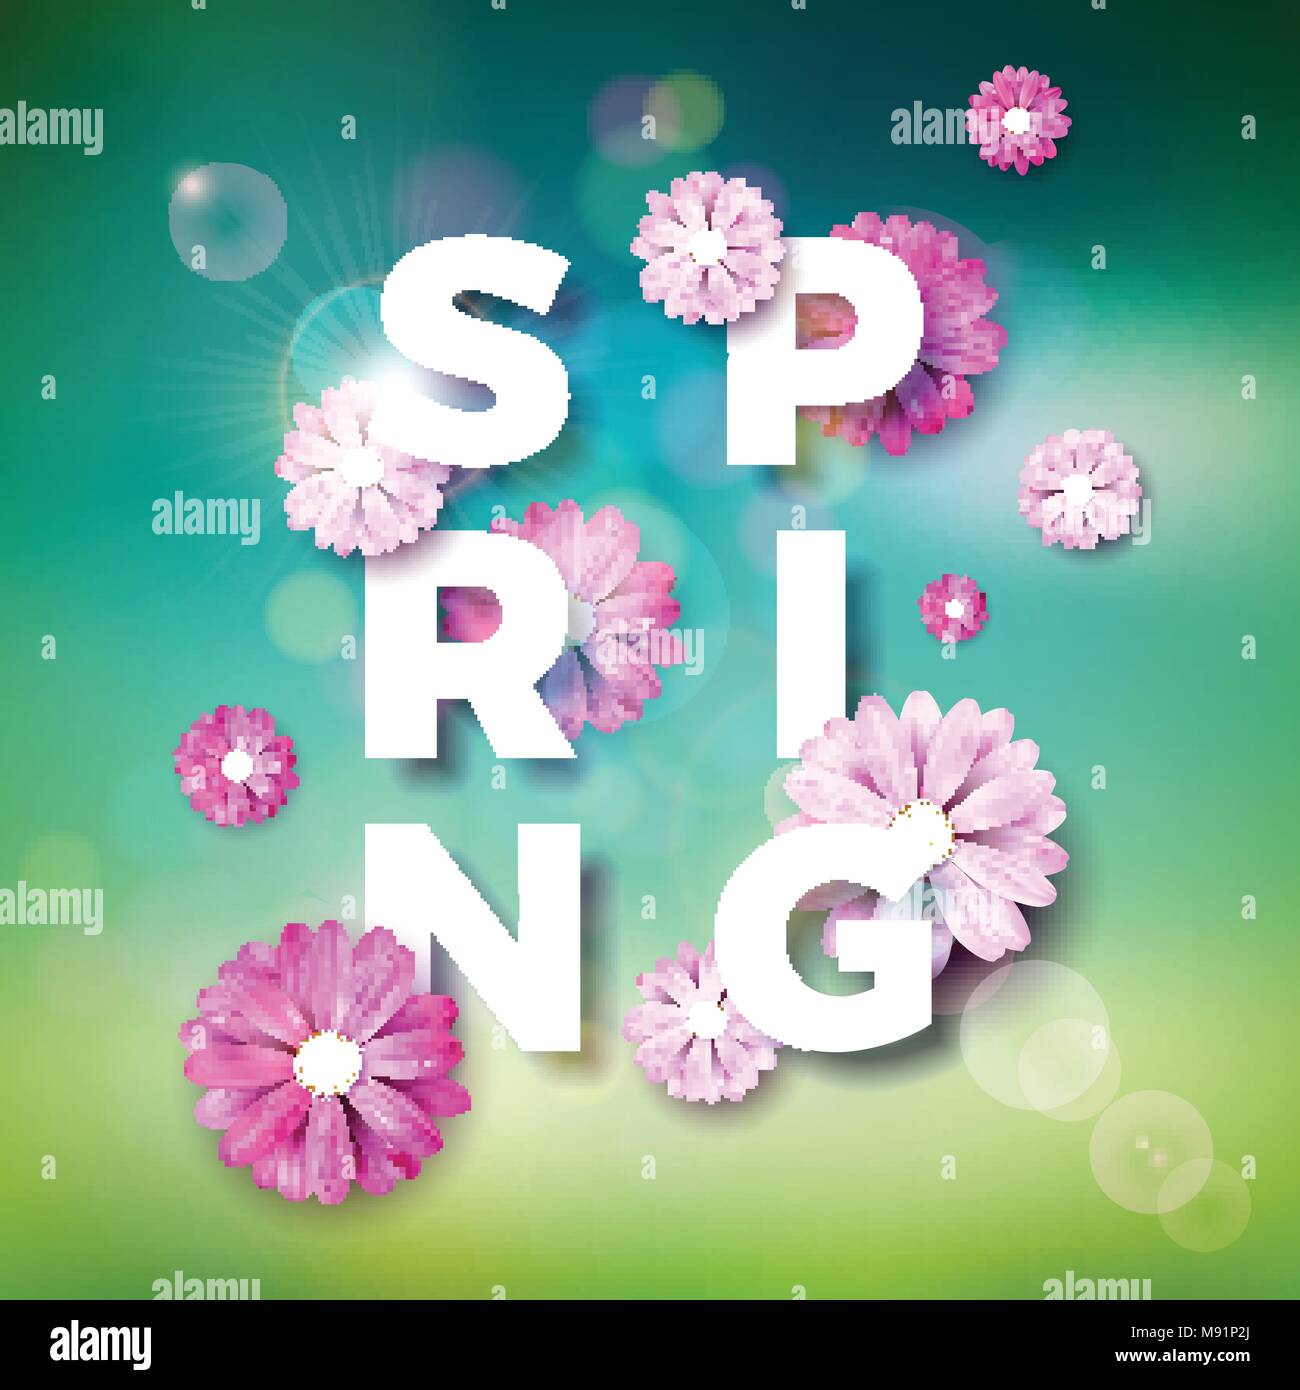 Vector Illustration on a spring nature theme with beautiful colorful flower on blurred landscape background. Floral design template with typography letter. Stock Vector